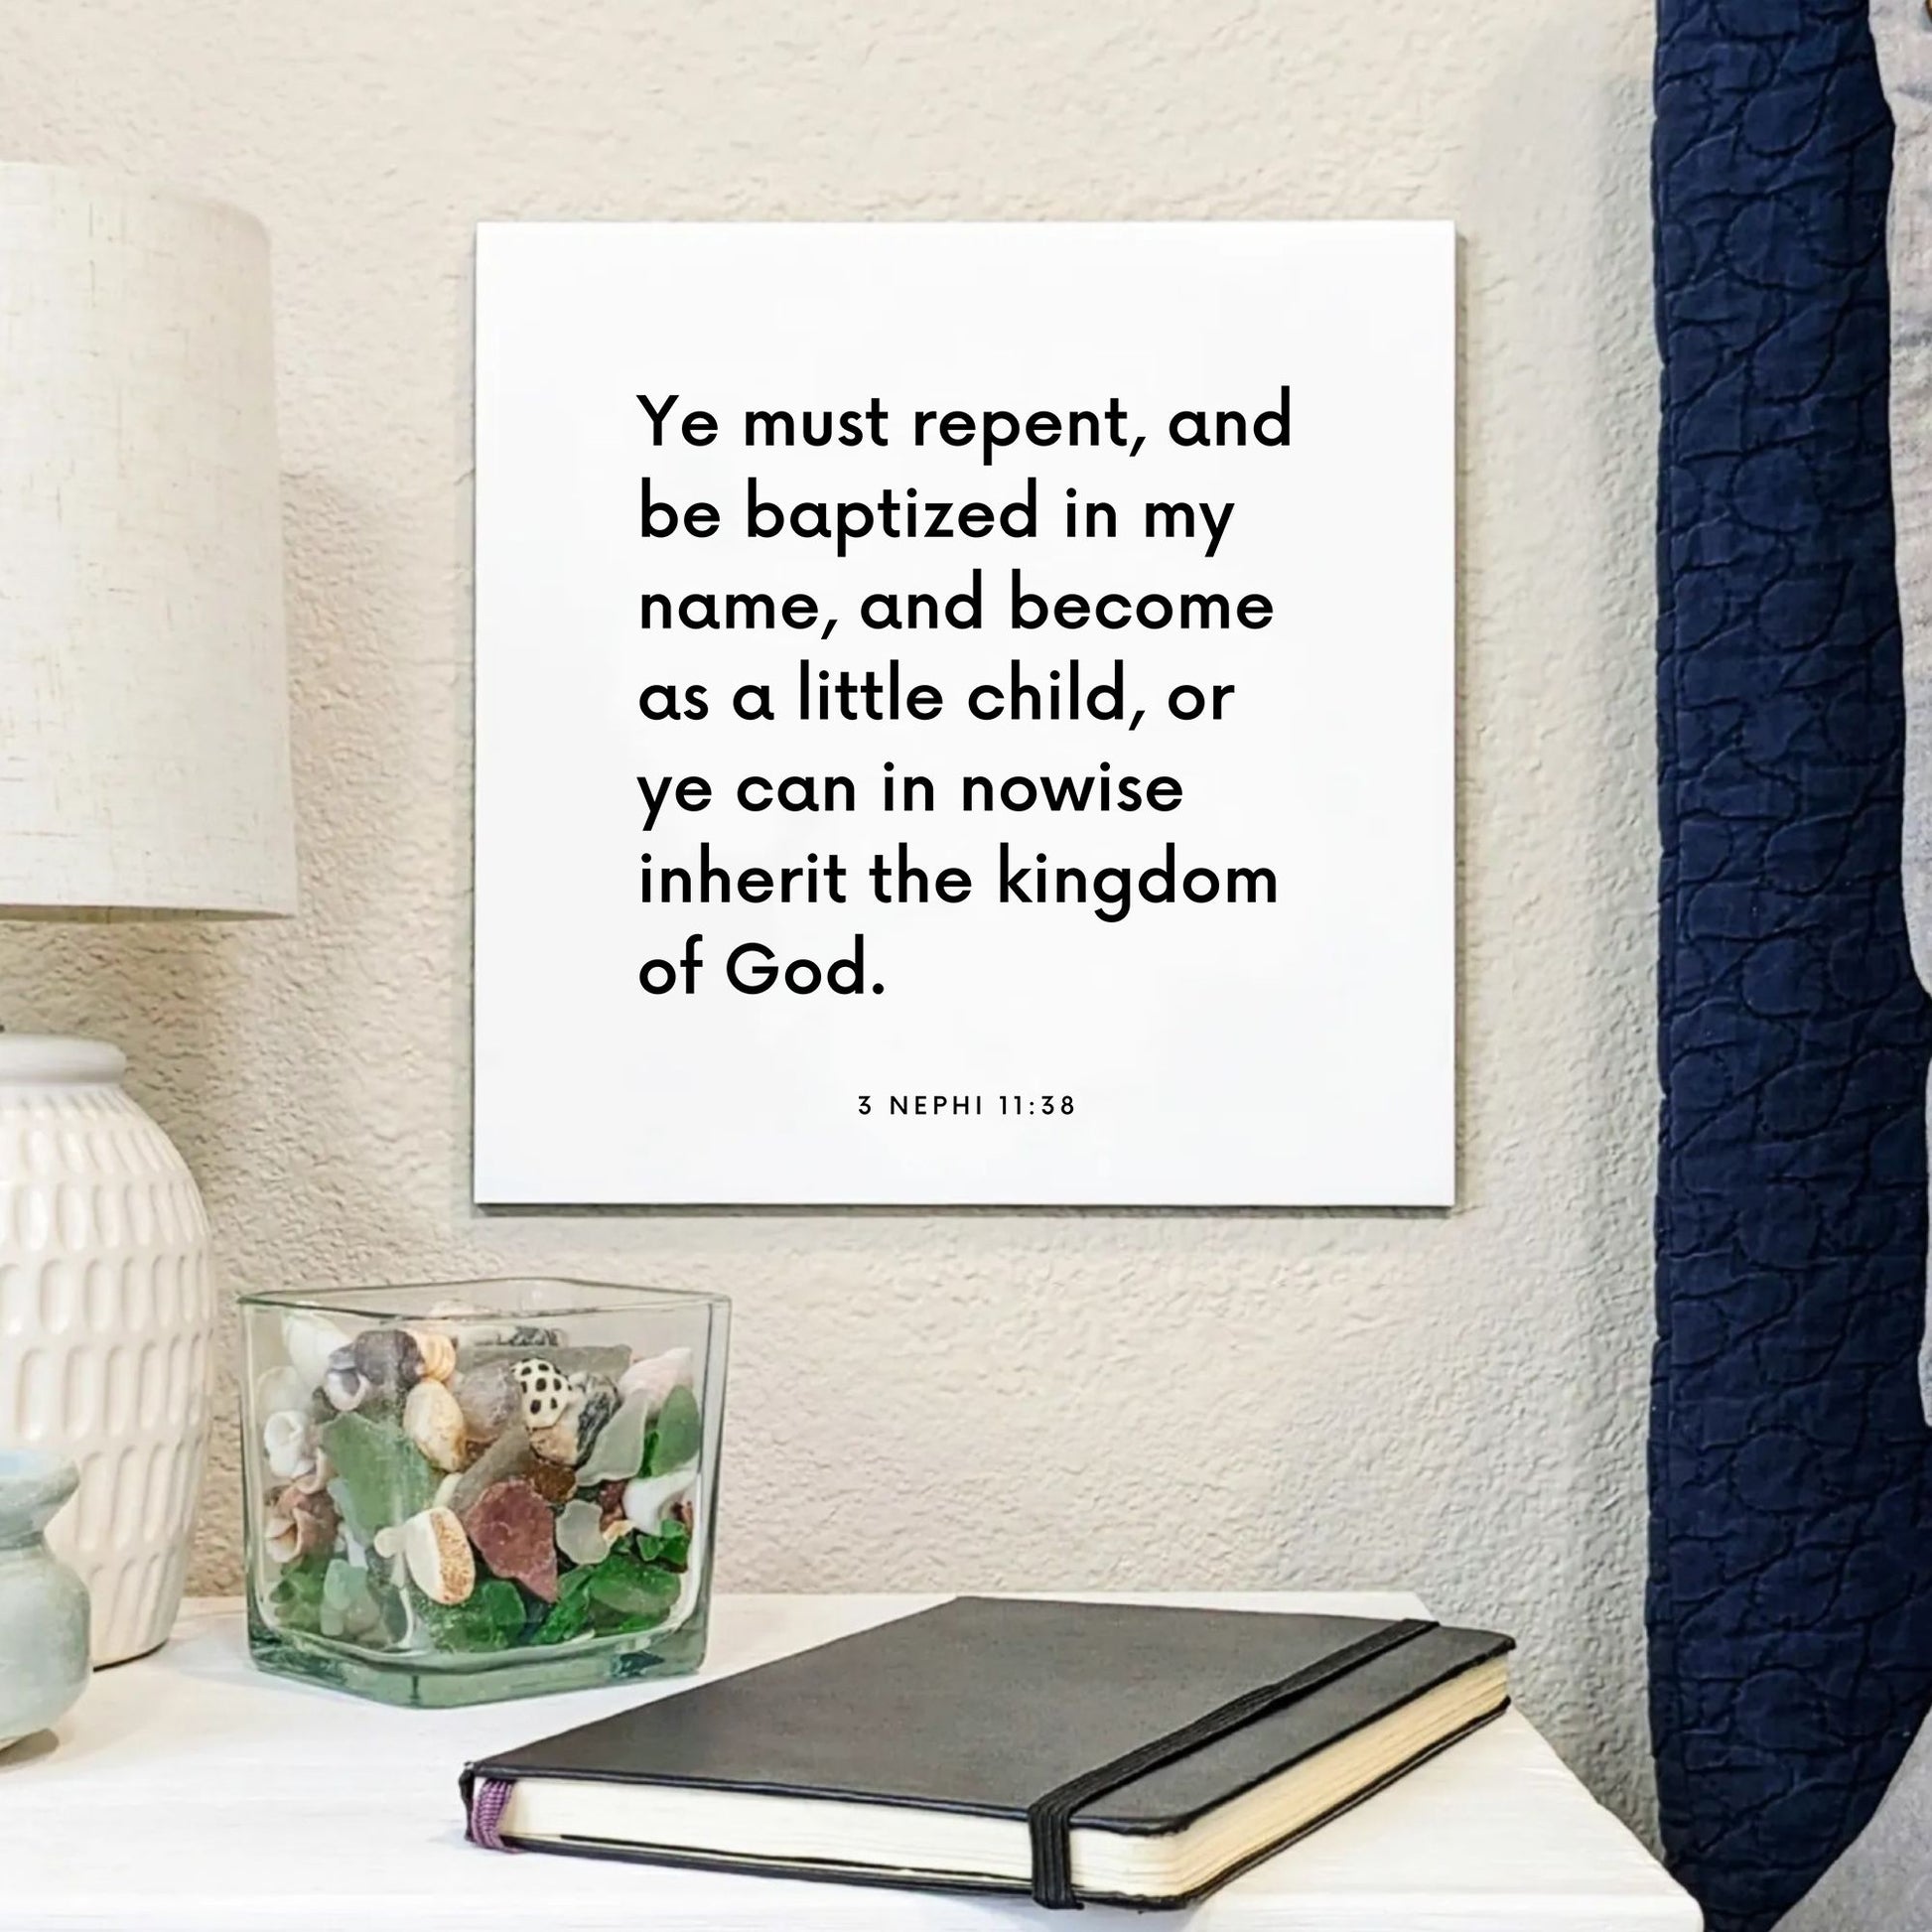 Bedside mouting of the scripture tile for 3 Nephi 11:38 - "Ye must repent, and be baptized in my name"